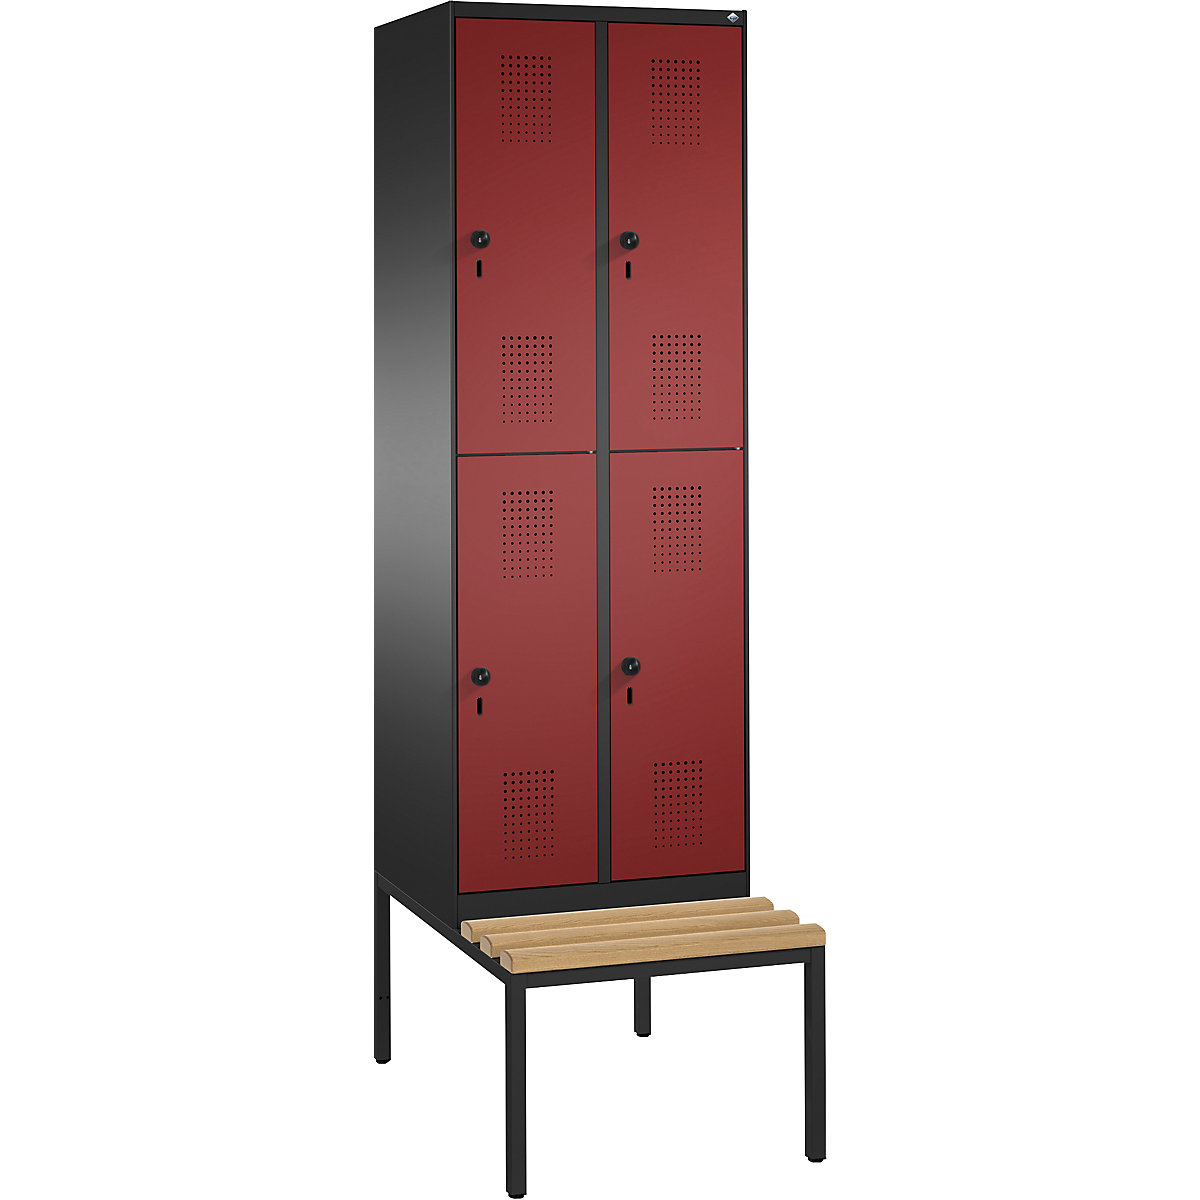 EVOLO cloakroom locker, double tier, with bench – C+P, 2 compartments, 2 shelf compartments each, compartment width 300 mm, black grey / ruby red-8